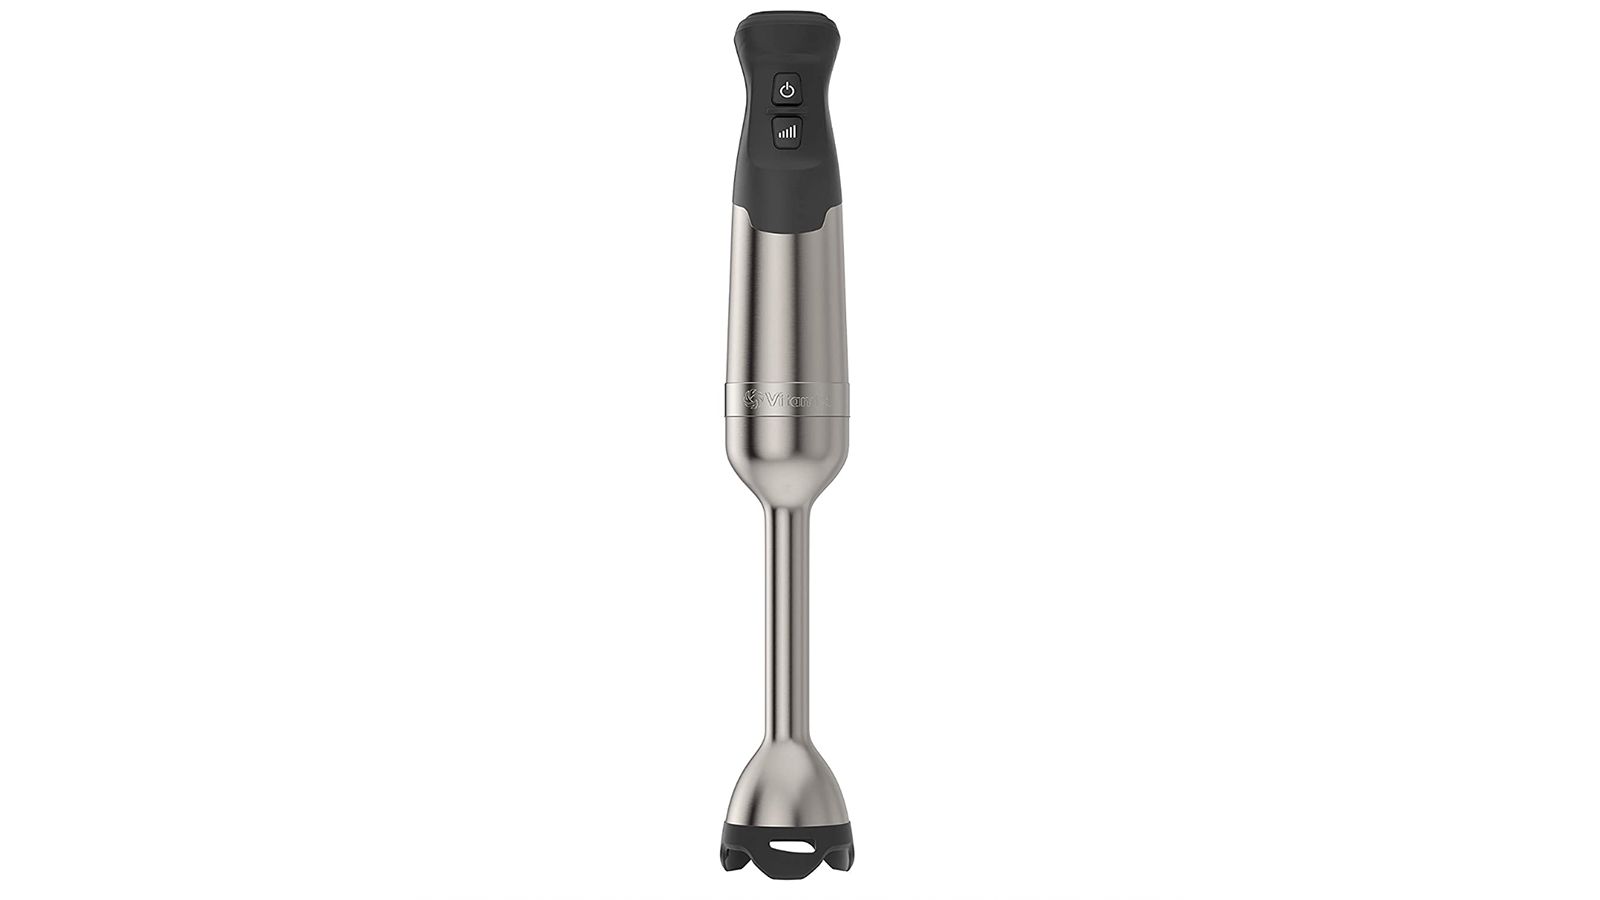 s Bestselling Immersion Blender Is on Sale for Just $30